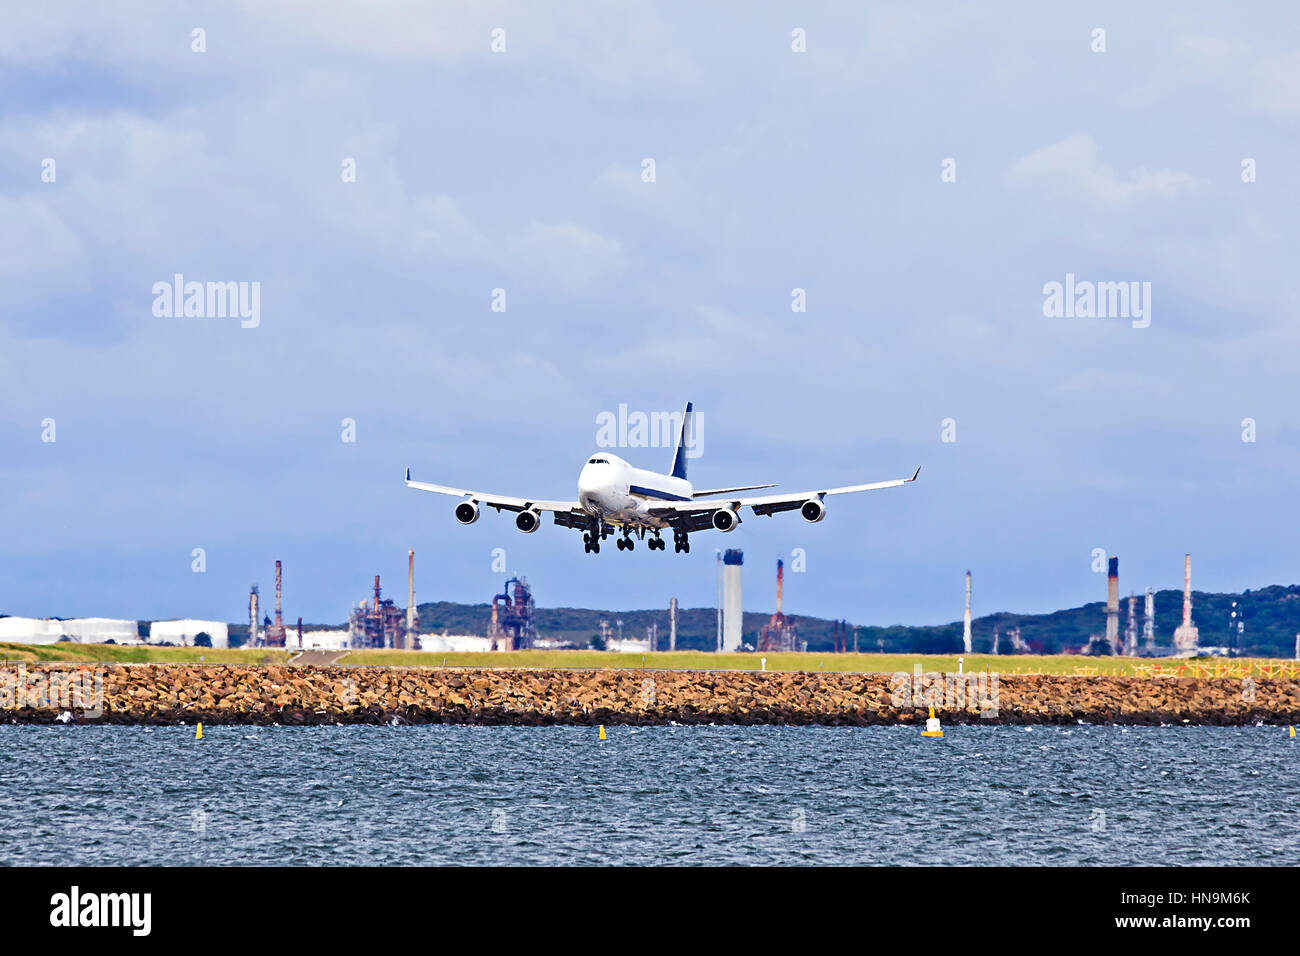 Huge jet airplane landing on Airport runway in Sydney against cargo terminal and blue sky. Stock Photo